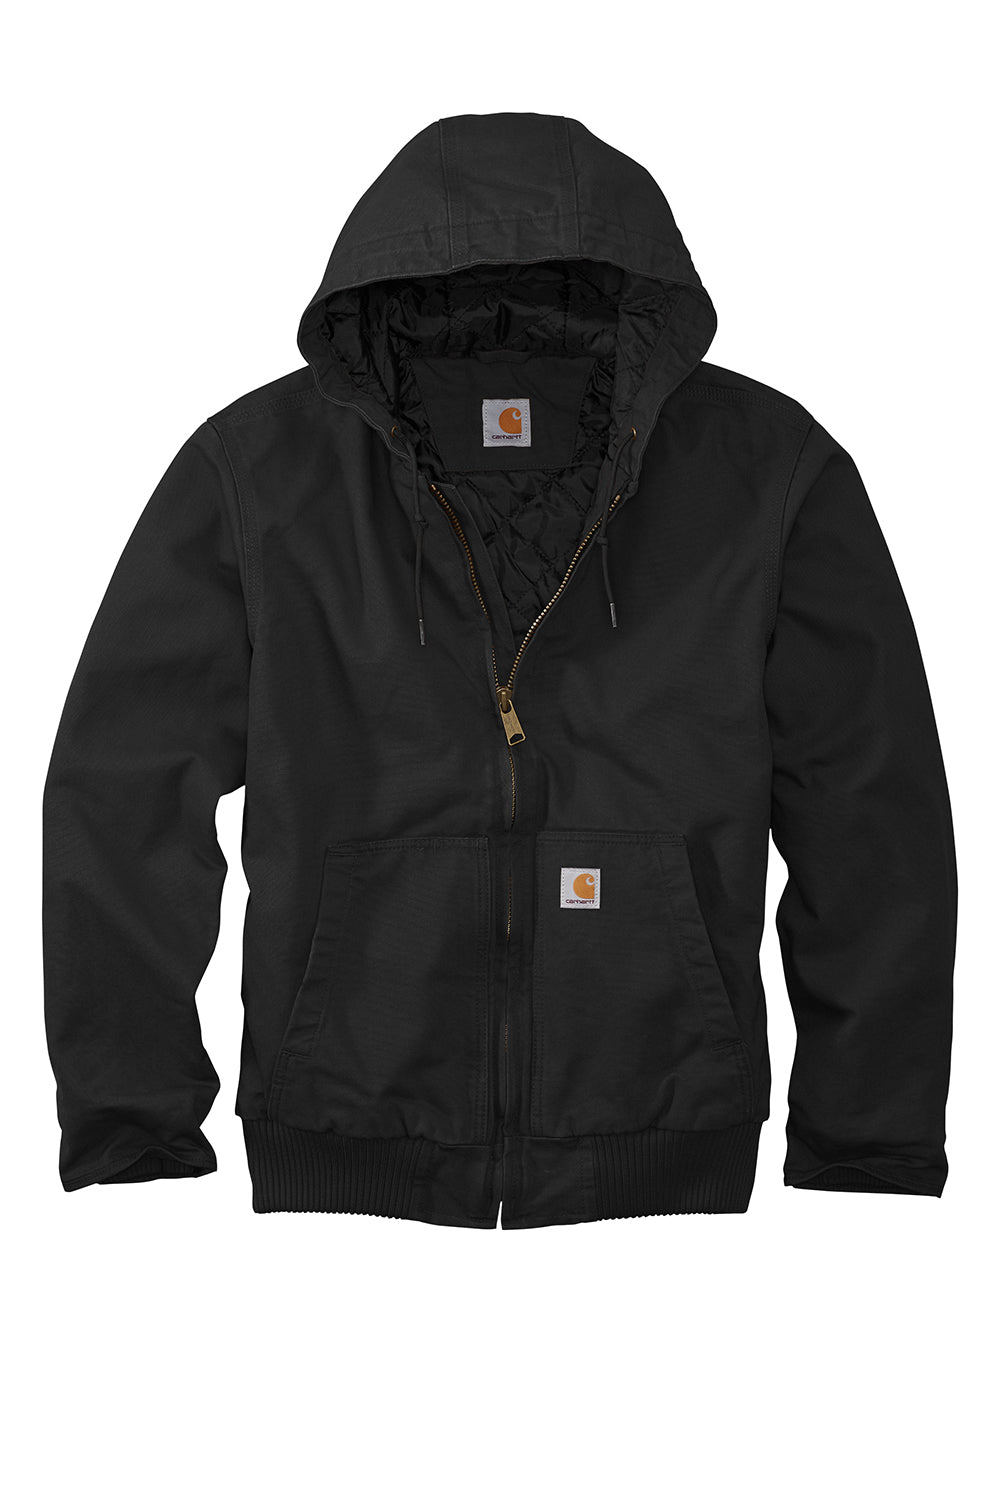 Carhartt CT104050/CTT104050 Mens Active Washed Duck Full Zip Hooded Jacket Black Flat Front